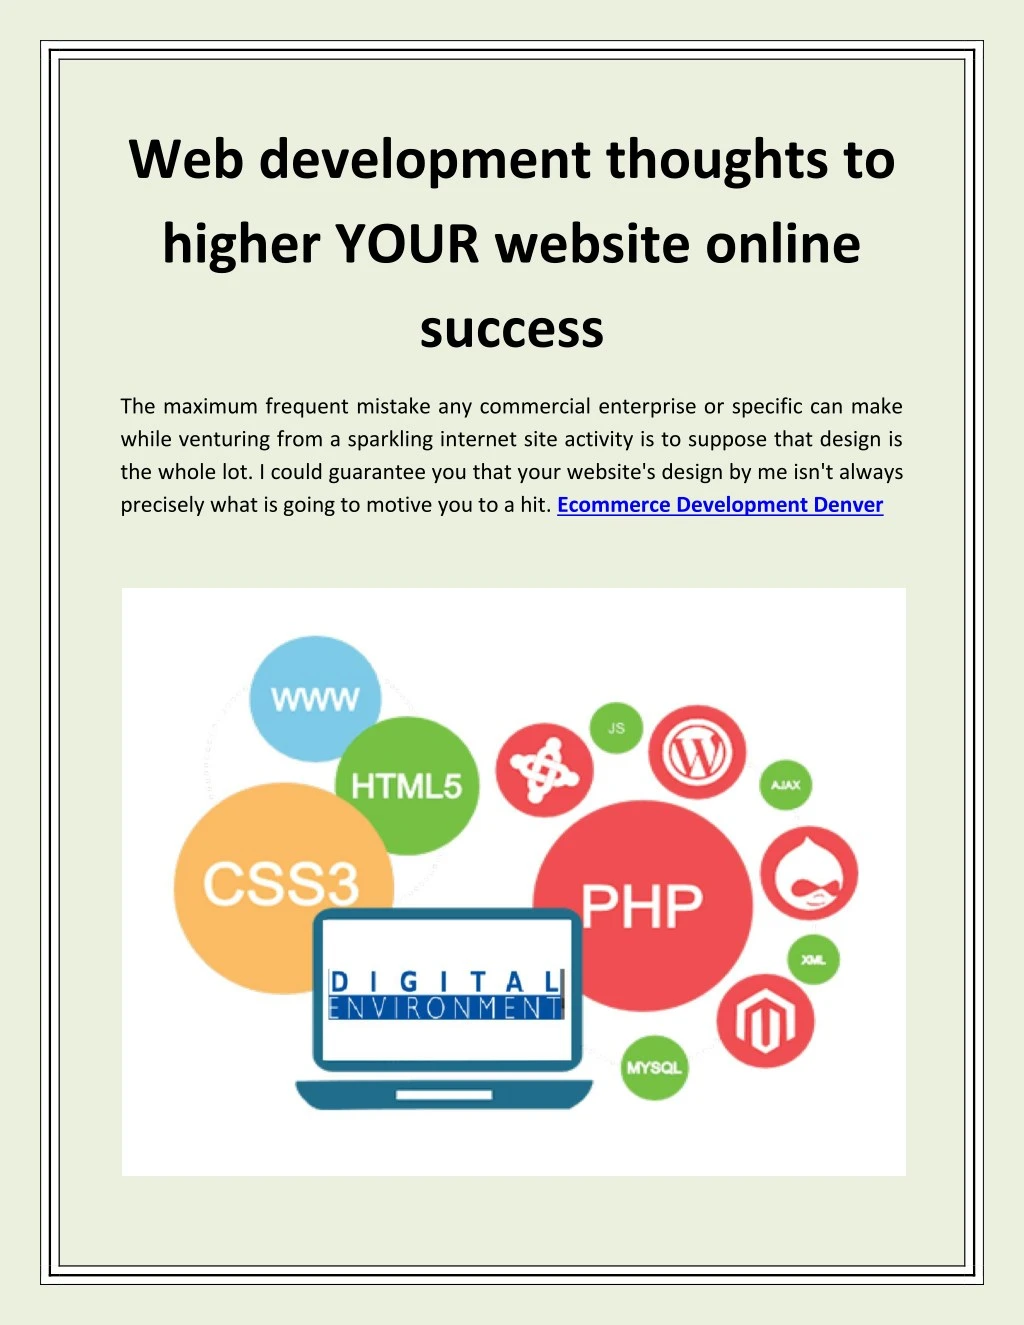 web development thoughts to higher your website